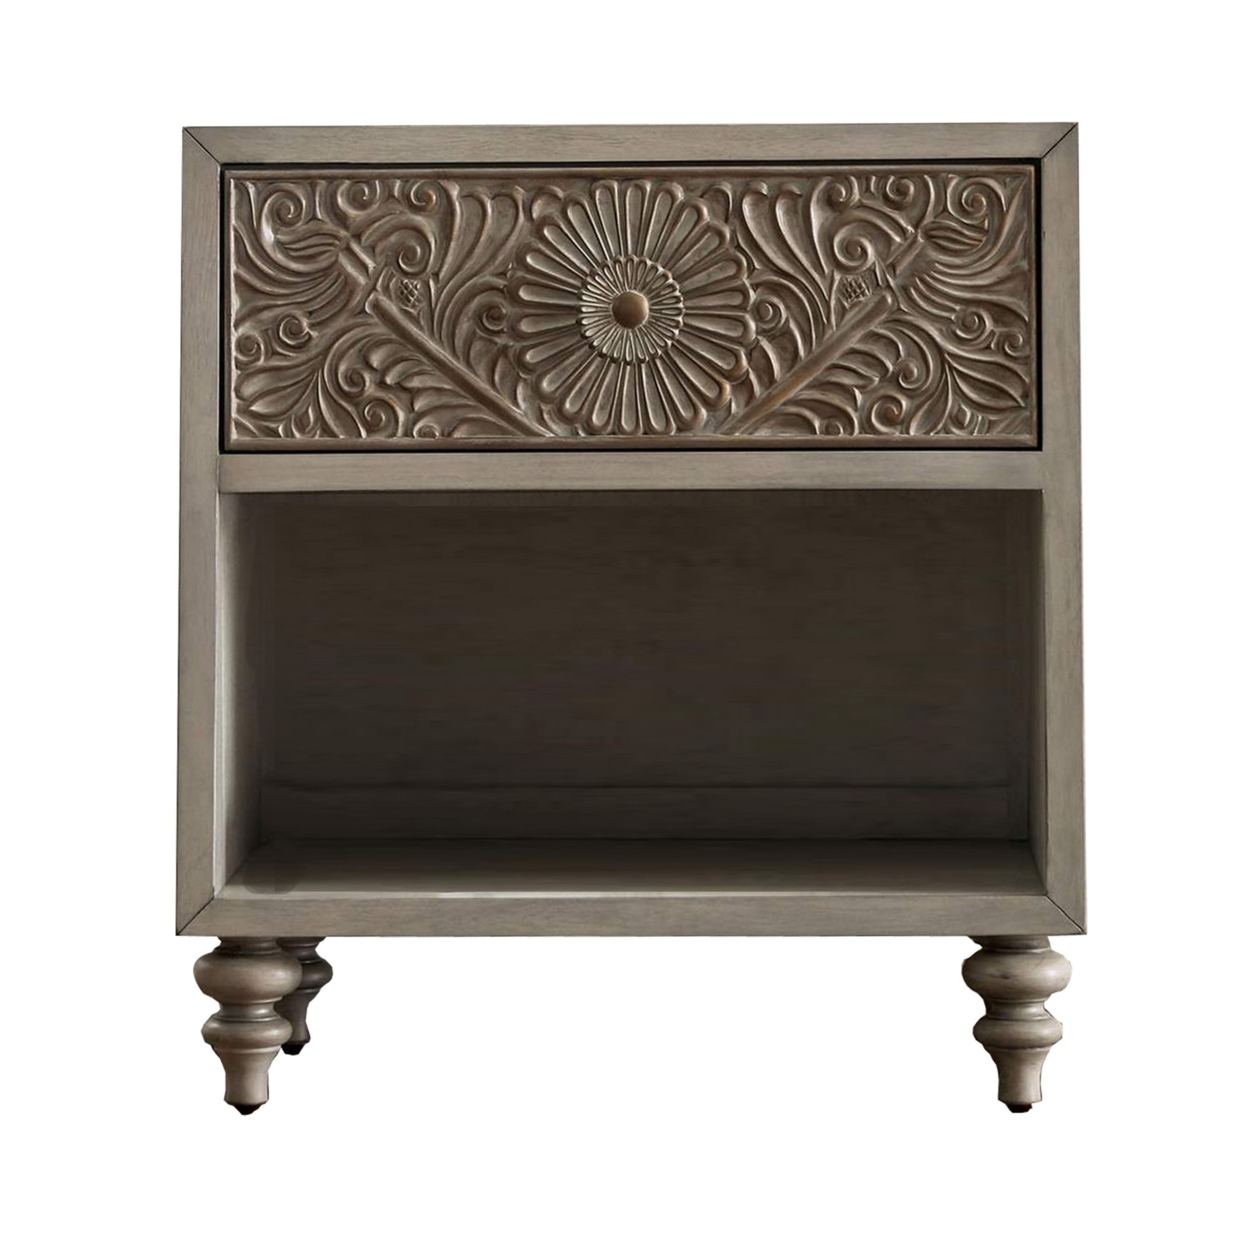 Night Stand With Polyresin Floral Design, Ivory- Saltoro Sherpi